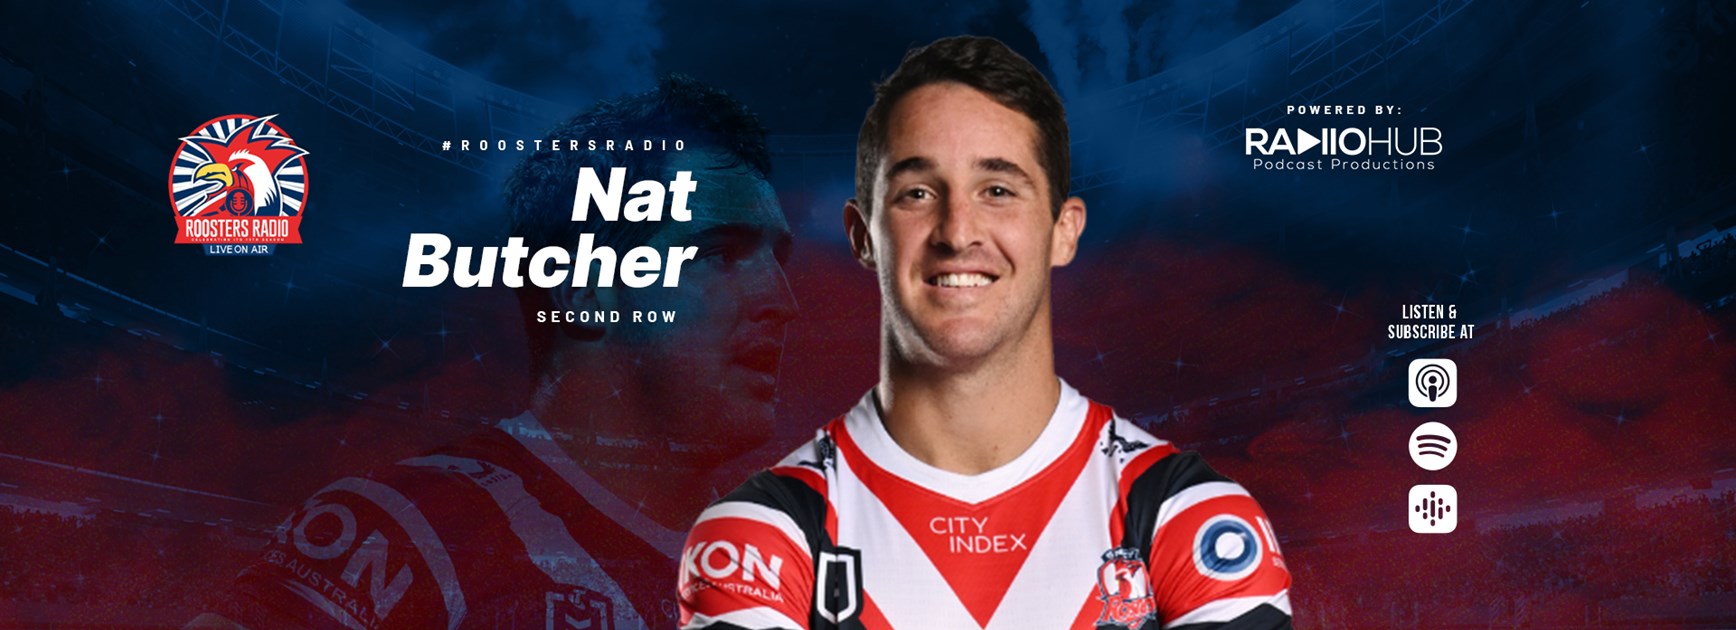 Roosters Radio Ep 153: Nat Butcher